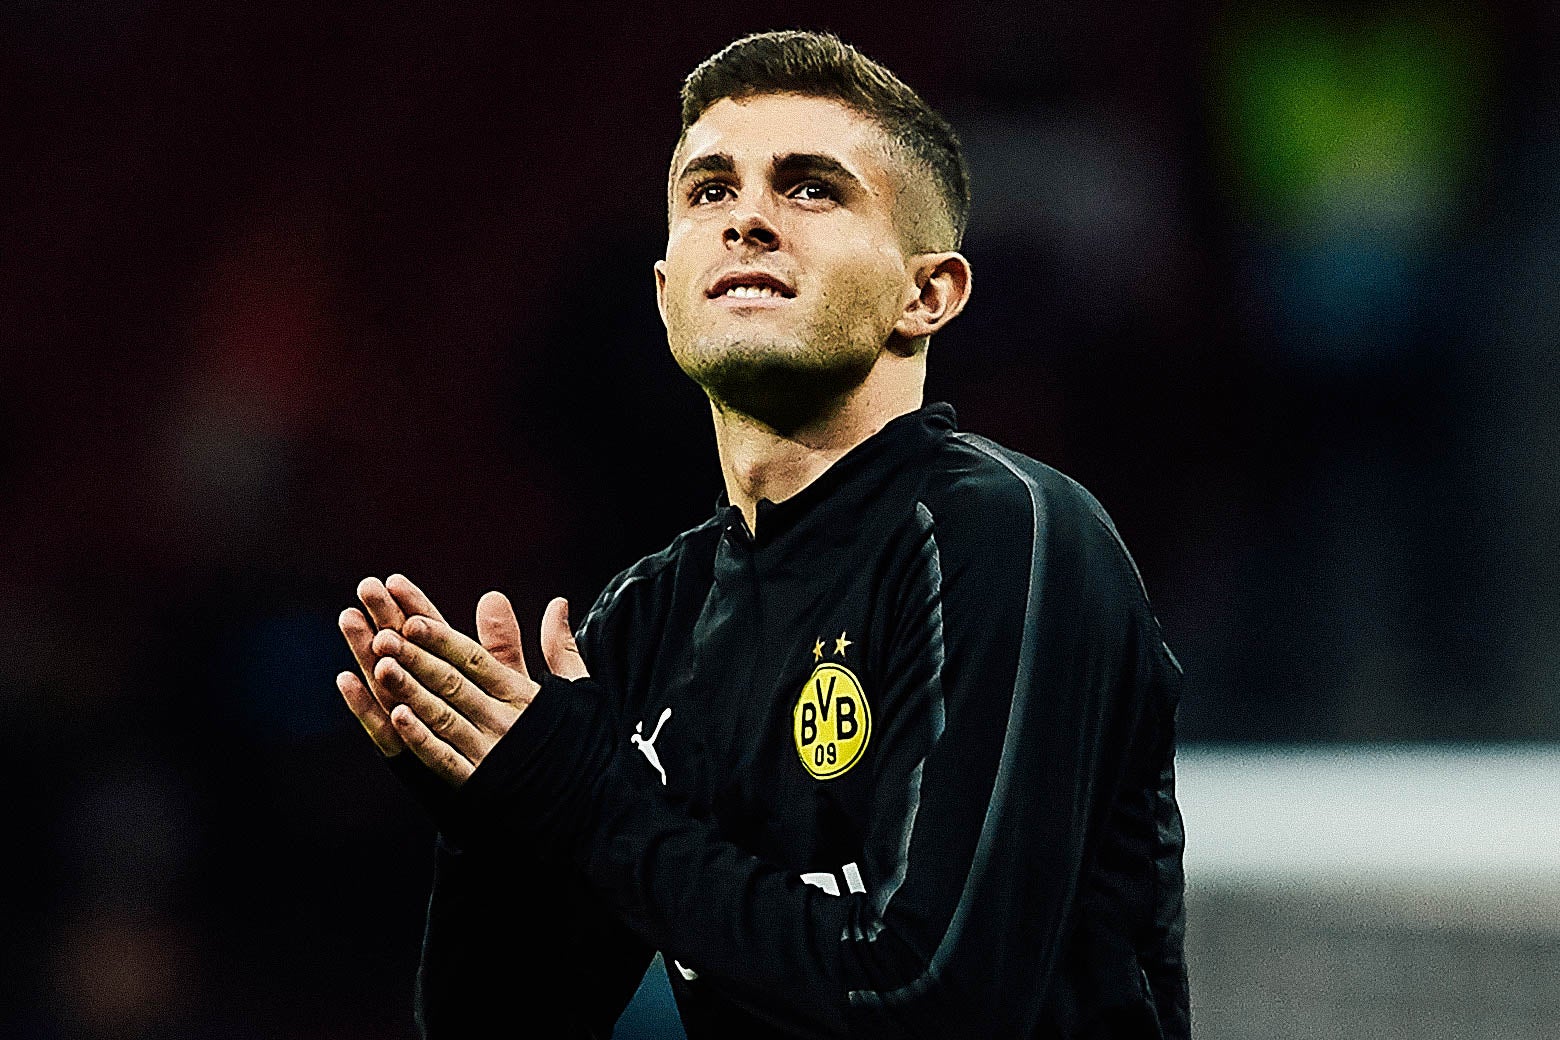 Pin by Hotdamn on USA footballers in 2023  Christian pulisic Christian  Chelsea football club